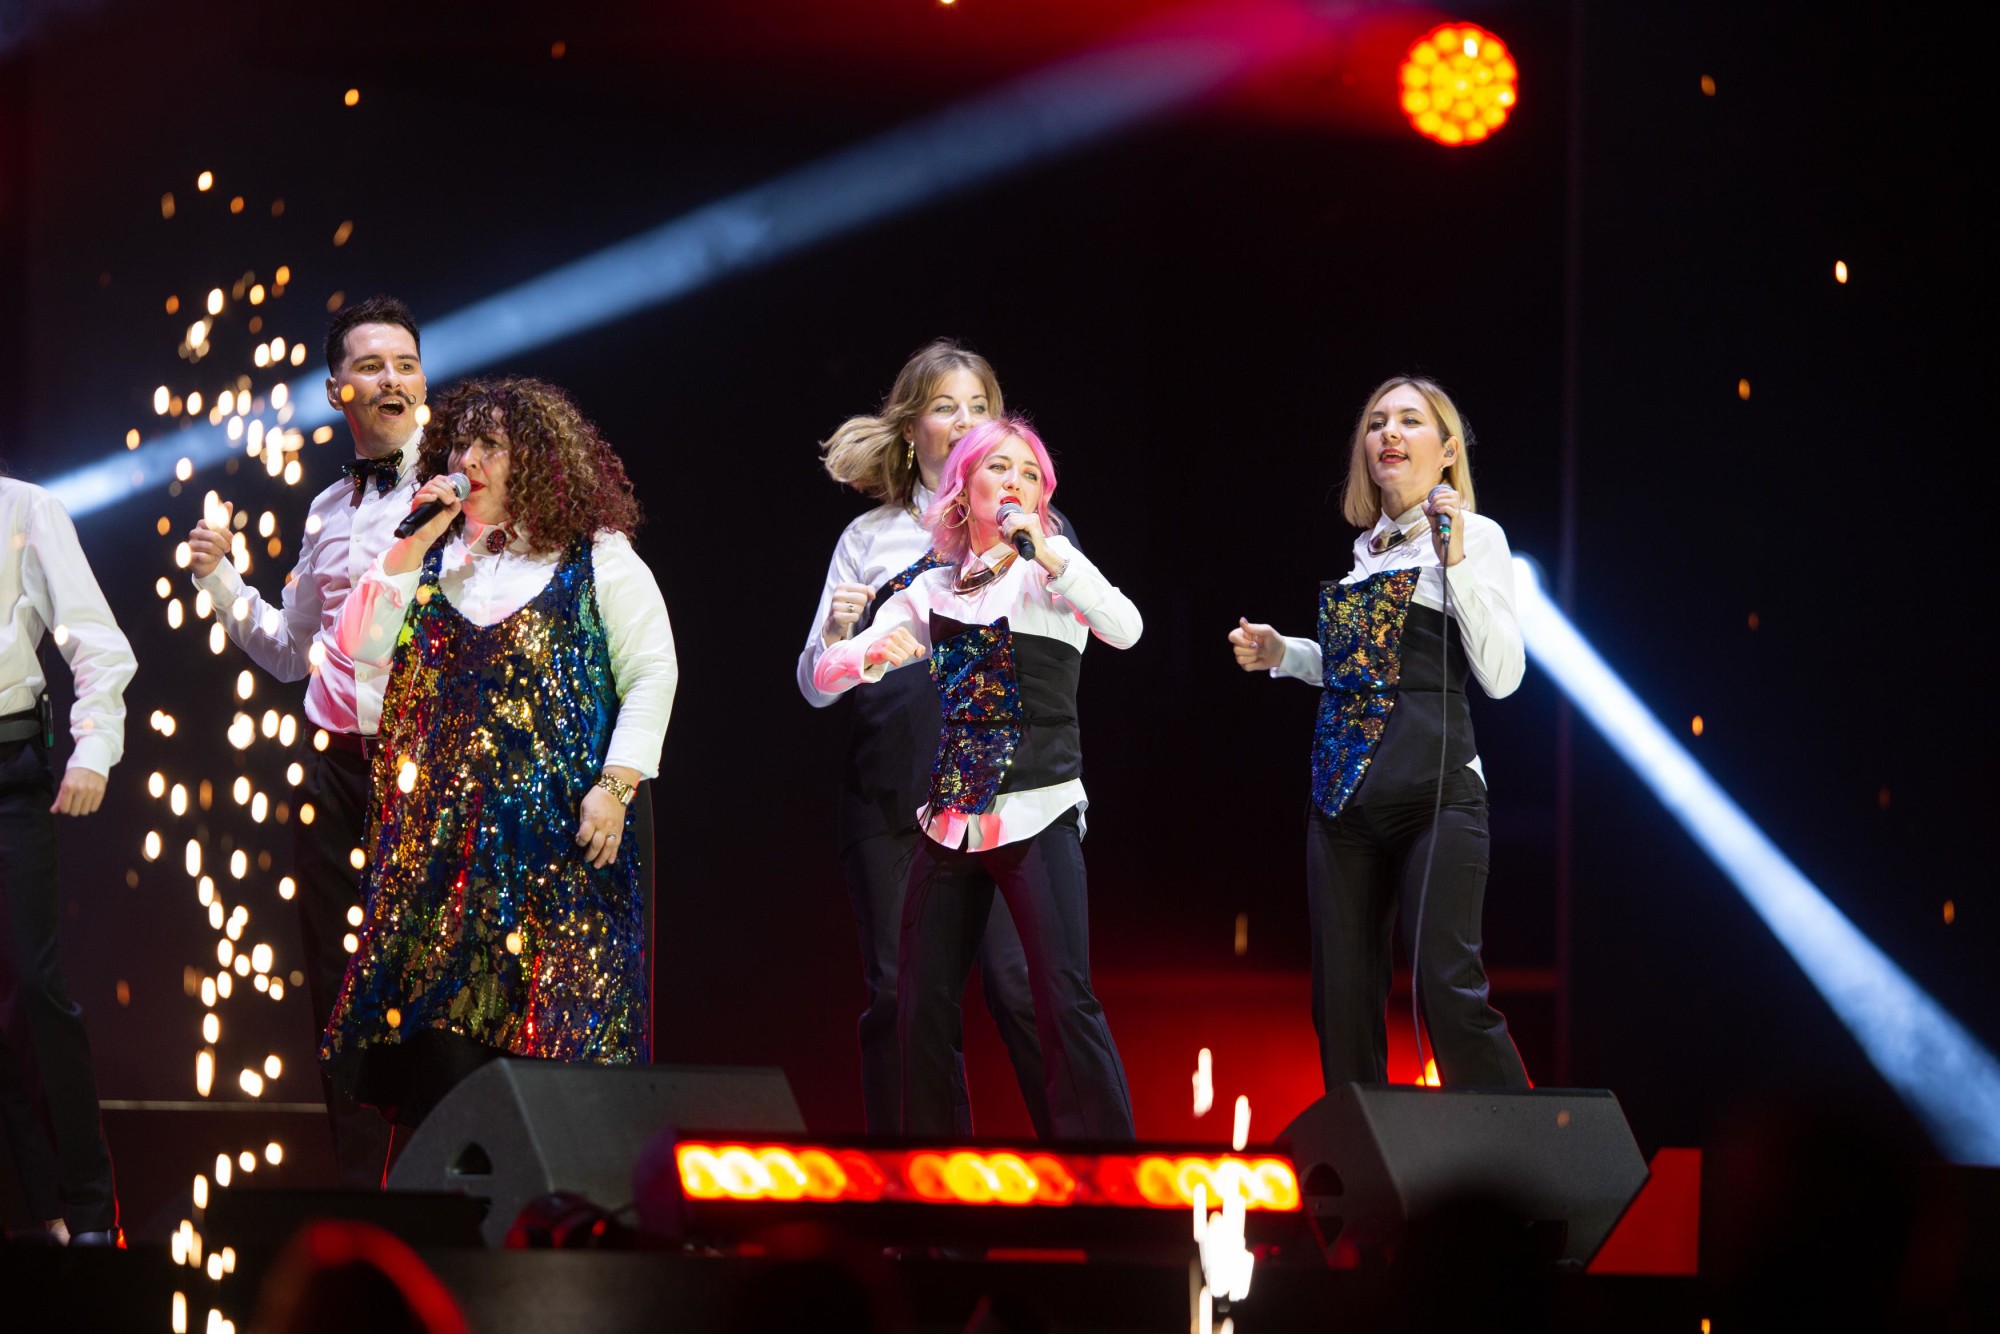 Moscow Gospel Team performs during Moscow Night at Jubilee Stage m16955